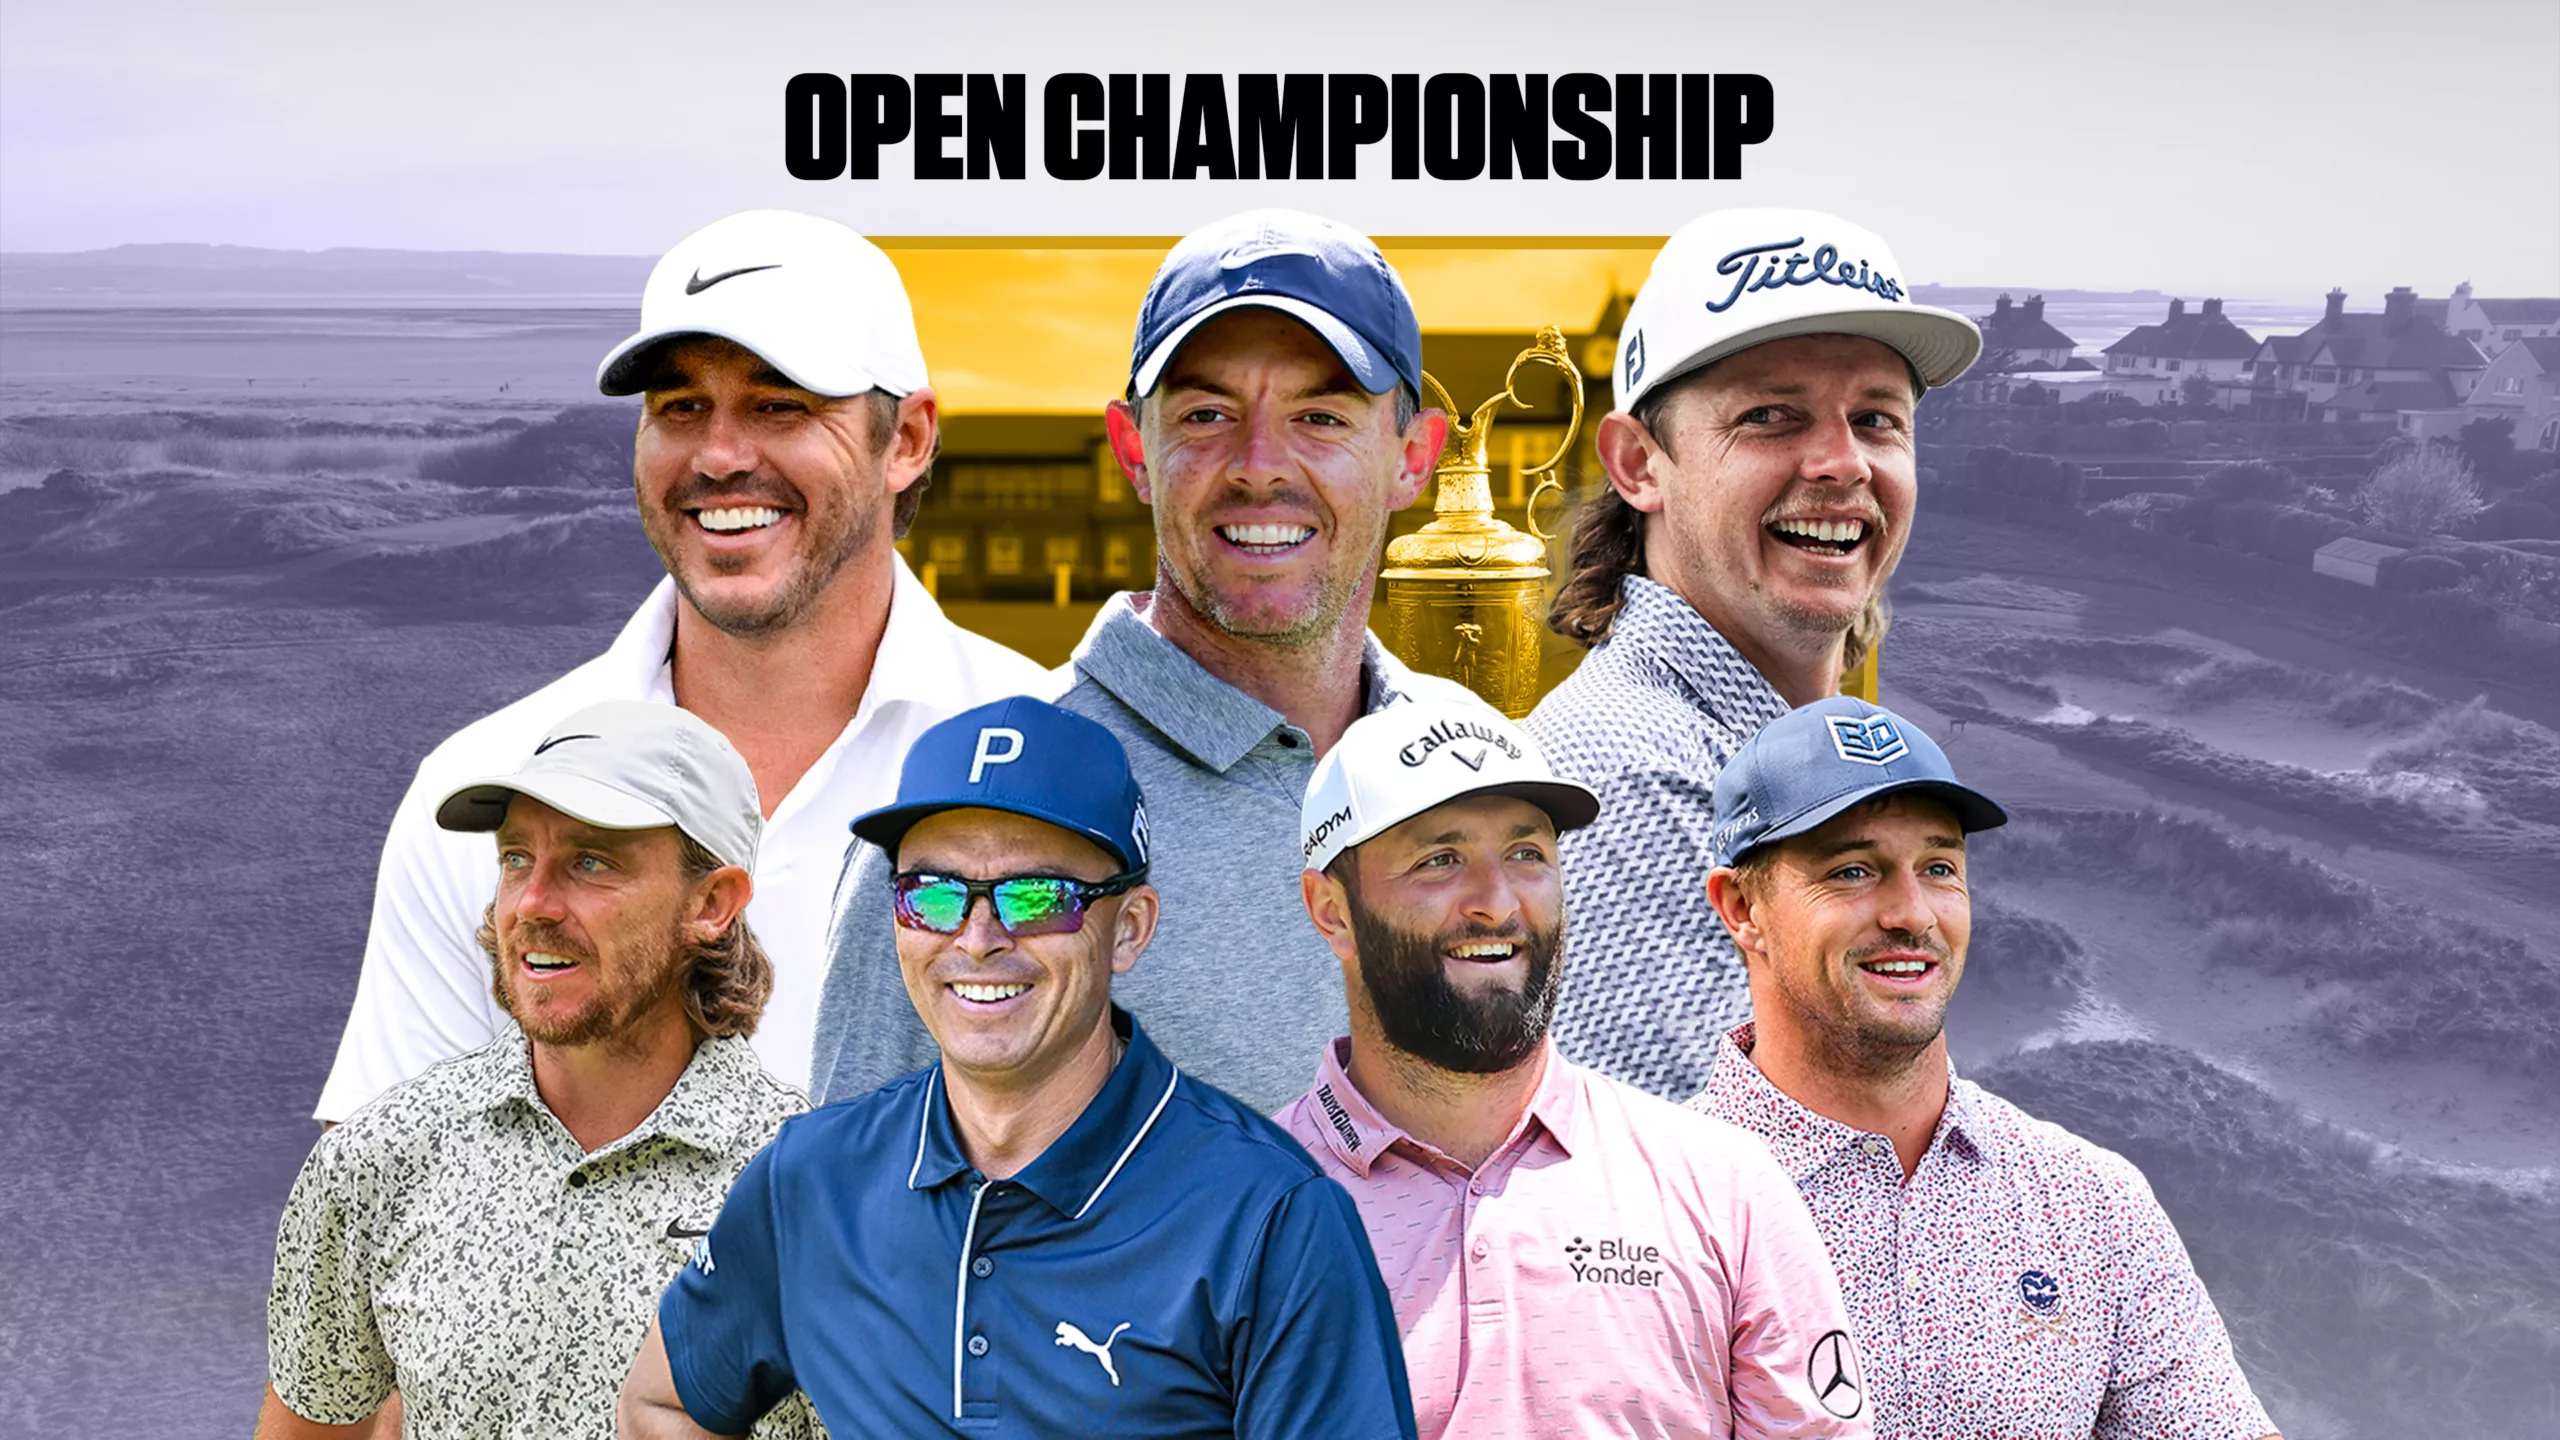 Our Staffs TOP 5 Picks to Win the Open